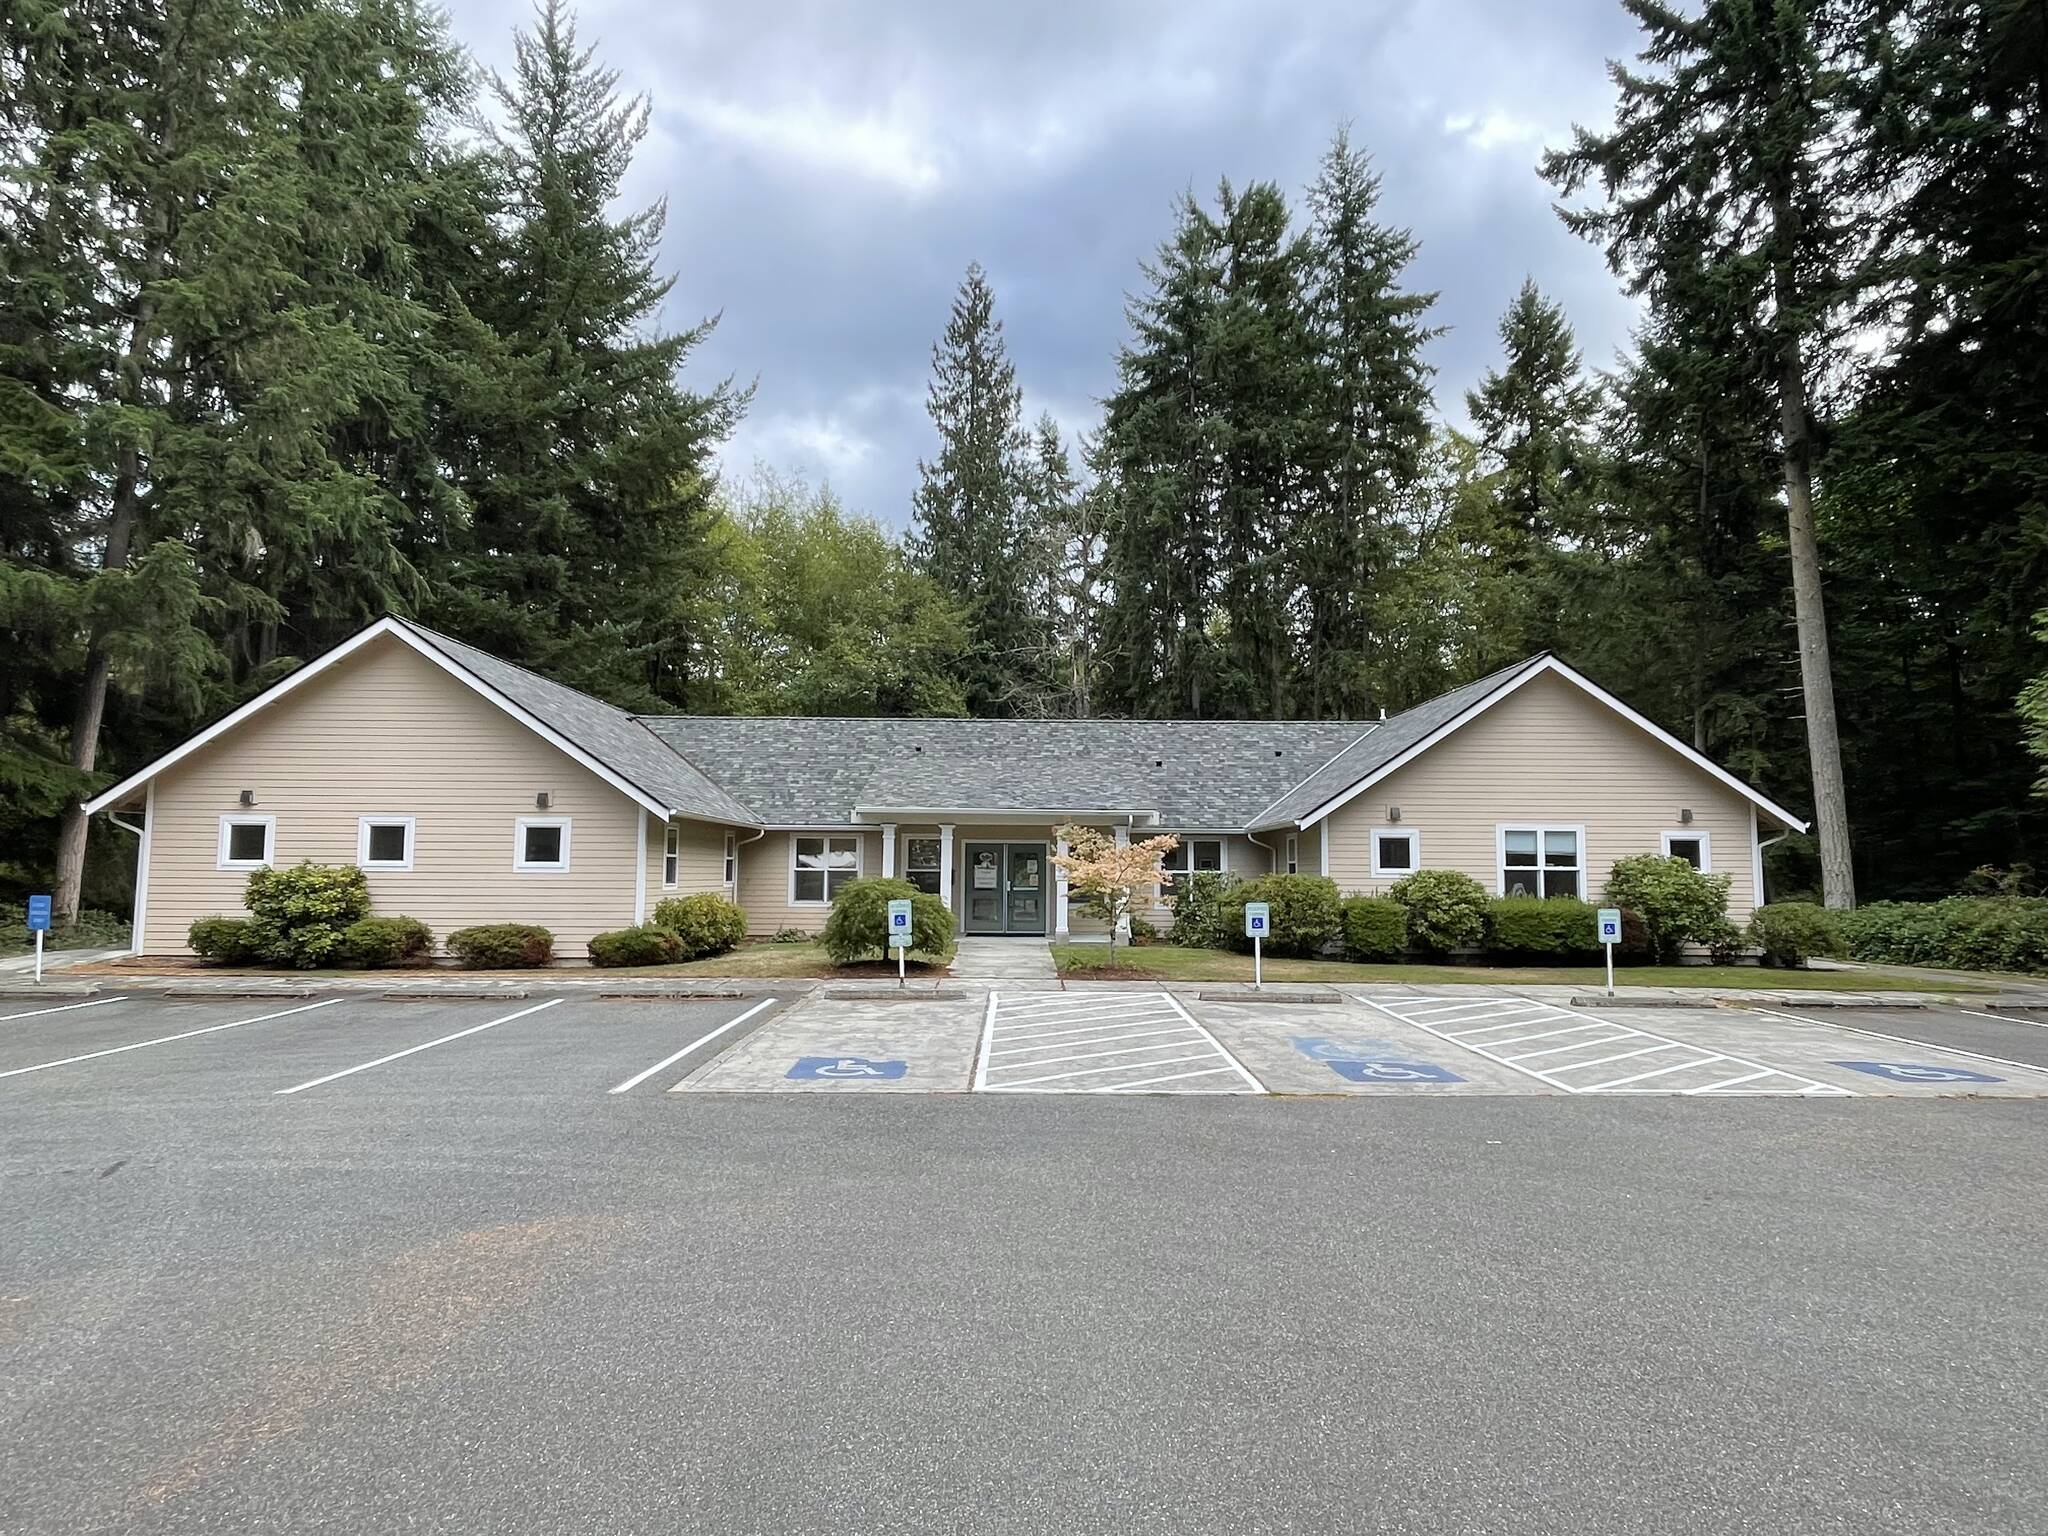 Photo provided
South Whidbey Parks and Recreation District offices are currently located at 5475 Maxwelton Road in Langley.